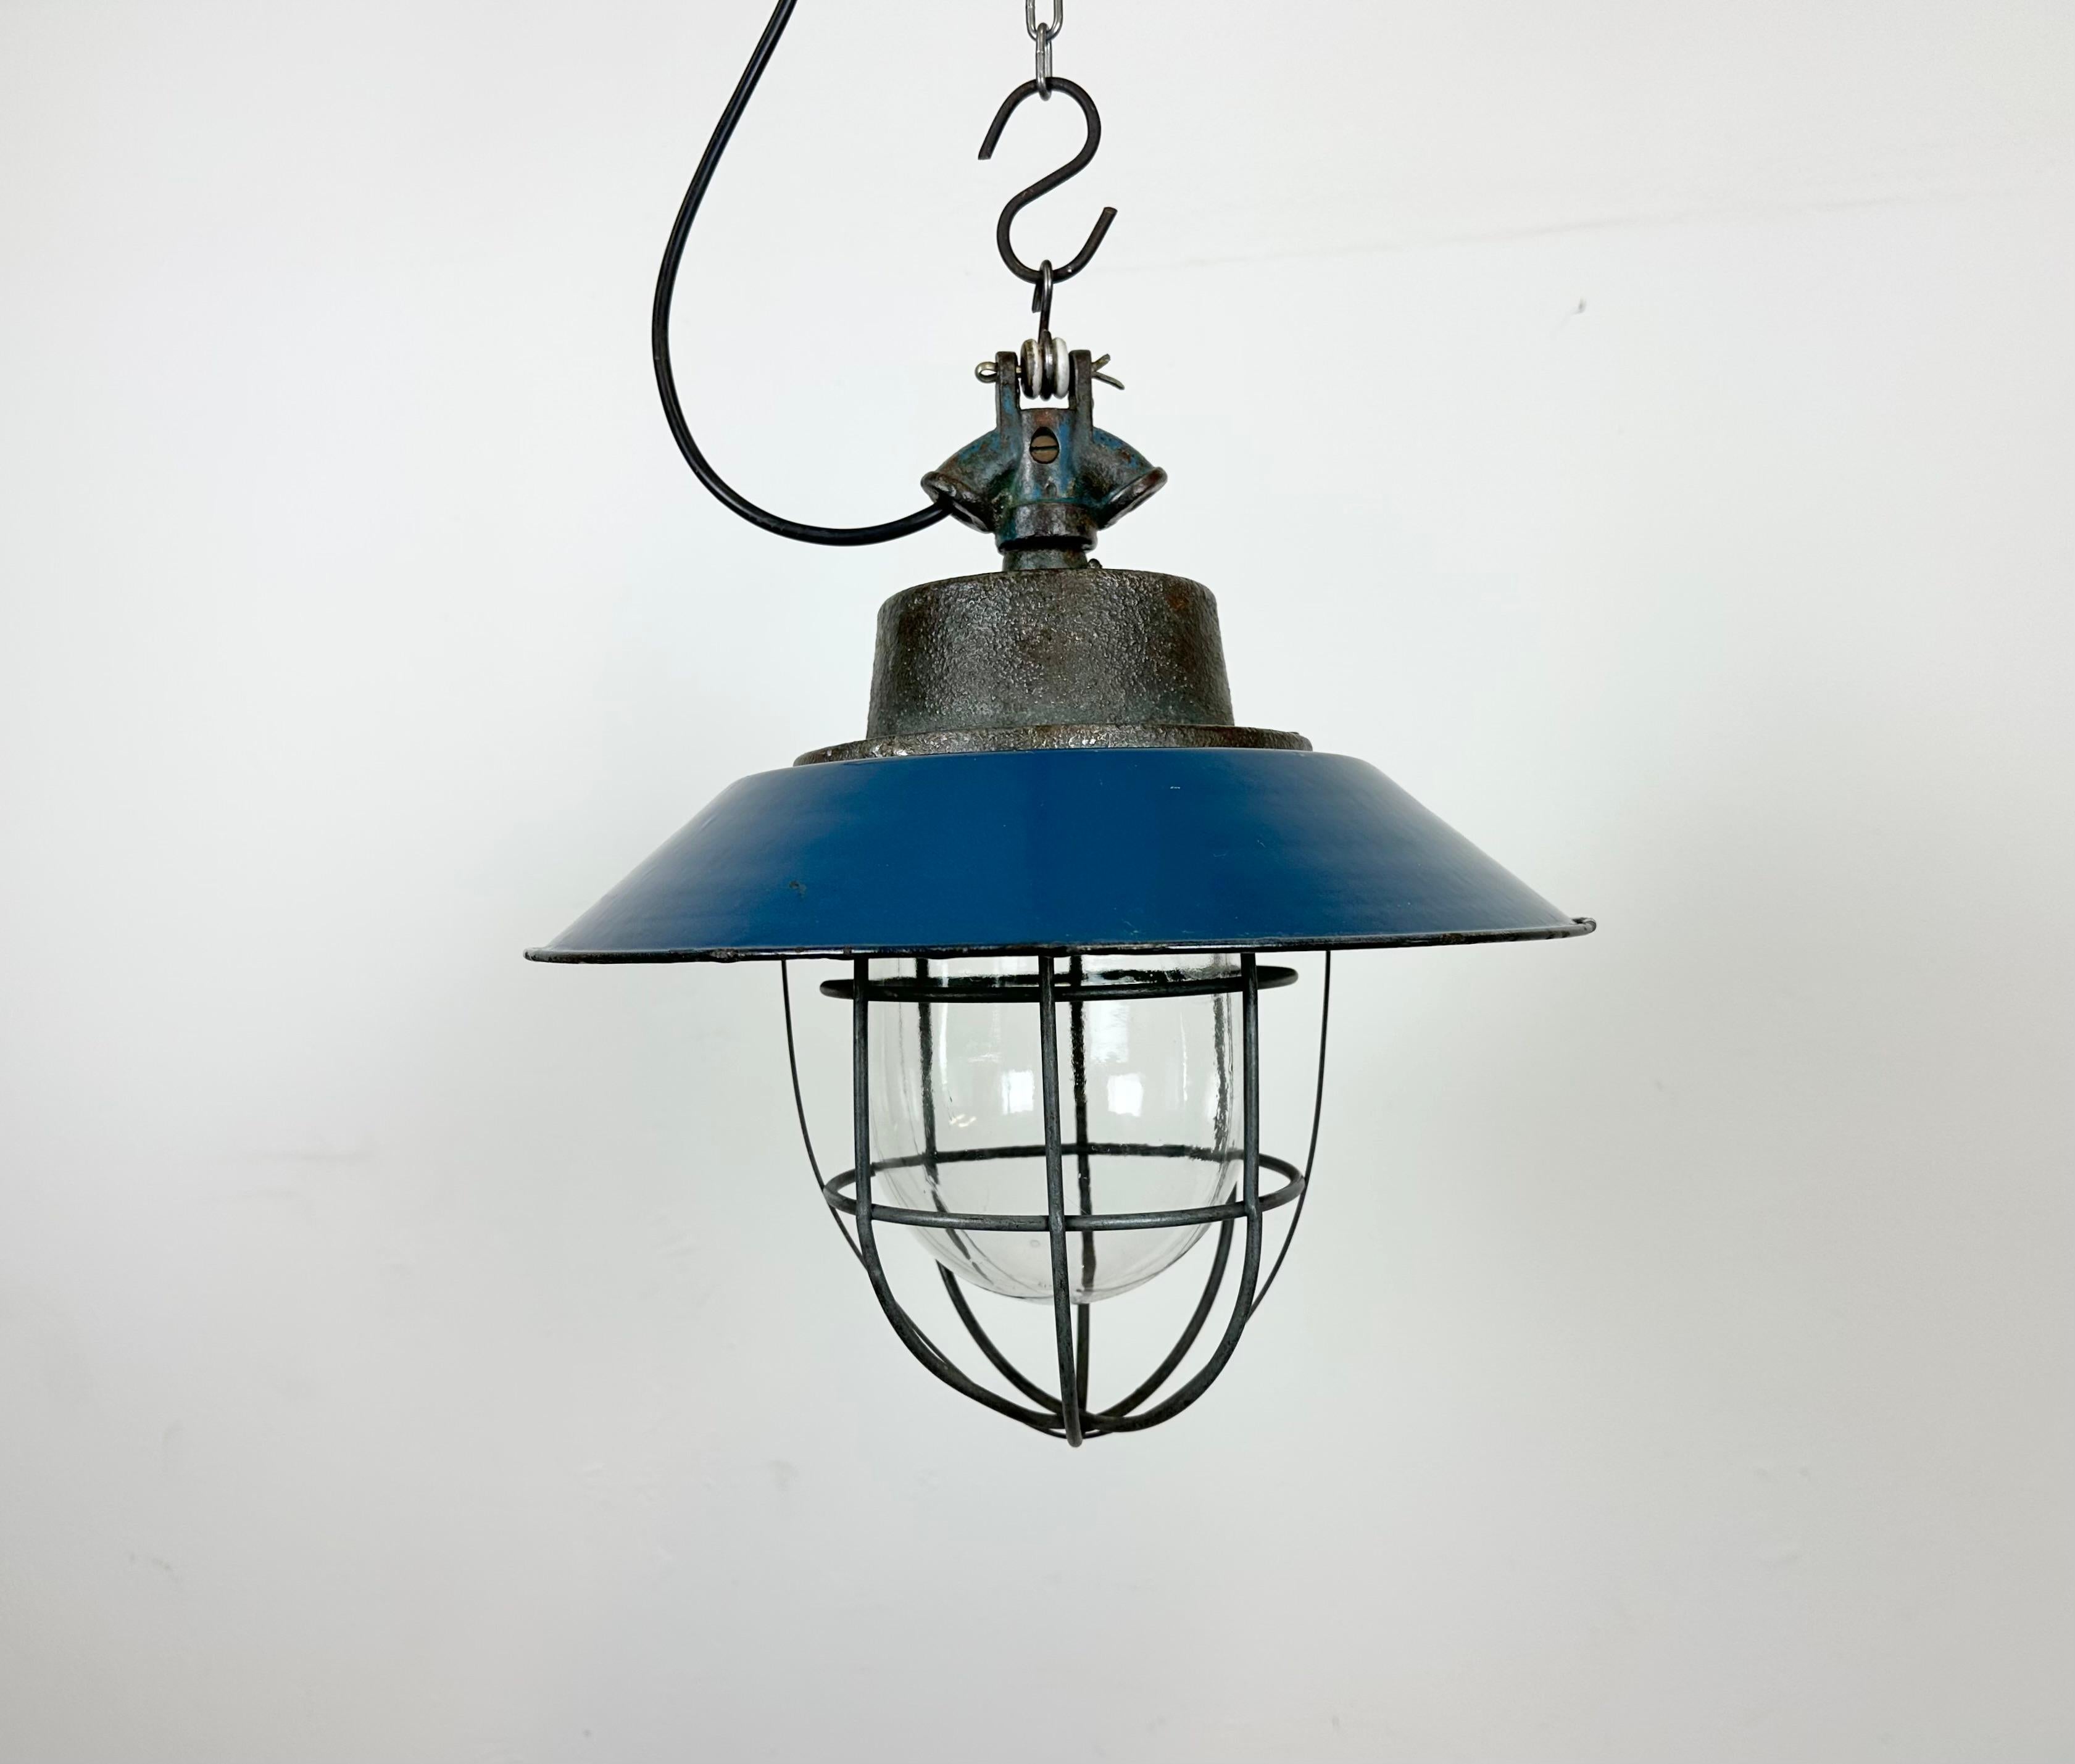 Industrial hanging lamp manufactured in Poland during the 1960s. It features a blue enamel shade with white enamel interior, a cast iron top,a clear glass cover and iron grid. The porcelain socket requires E 27 lightbulbs .New wire. The weight of